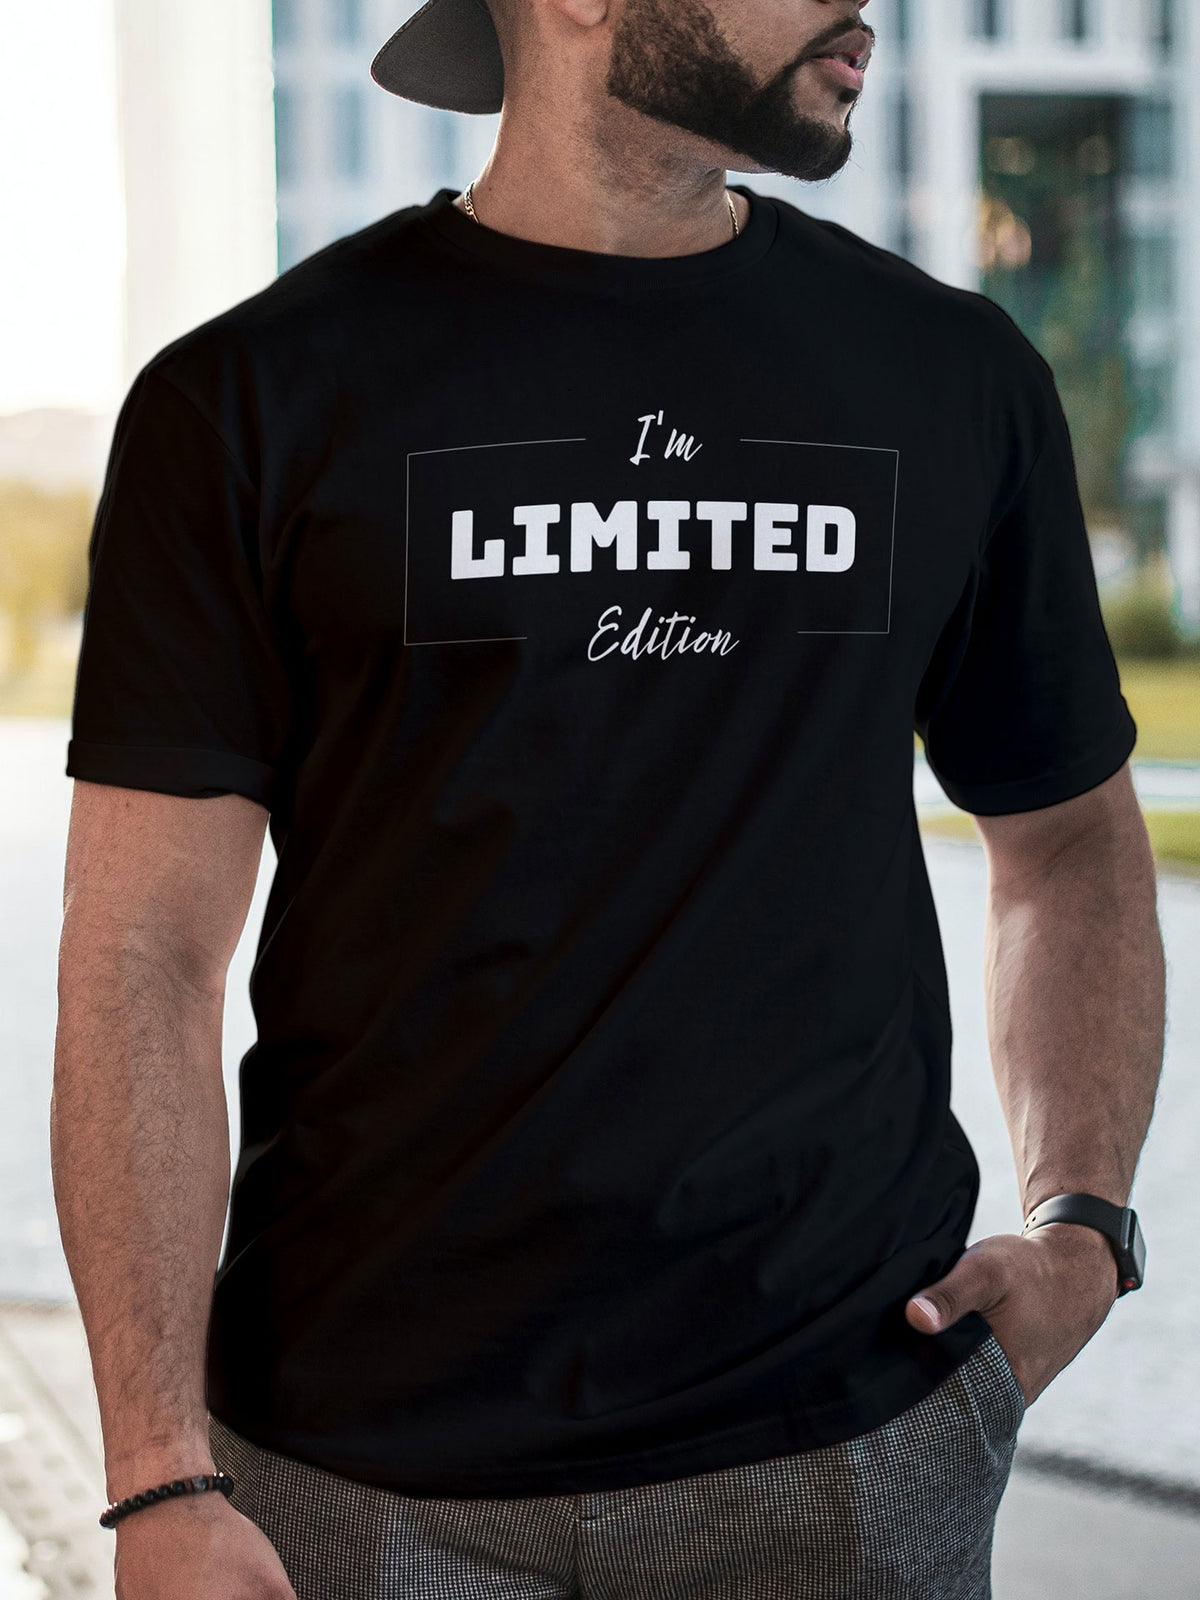 Men's Black Limited Edition Printed T-shirt